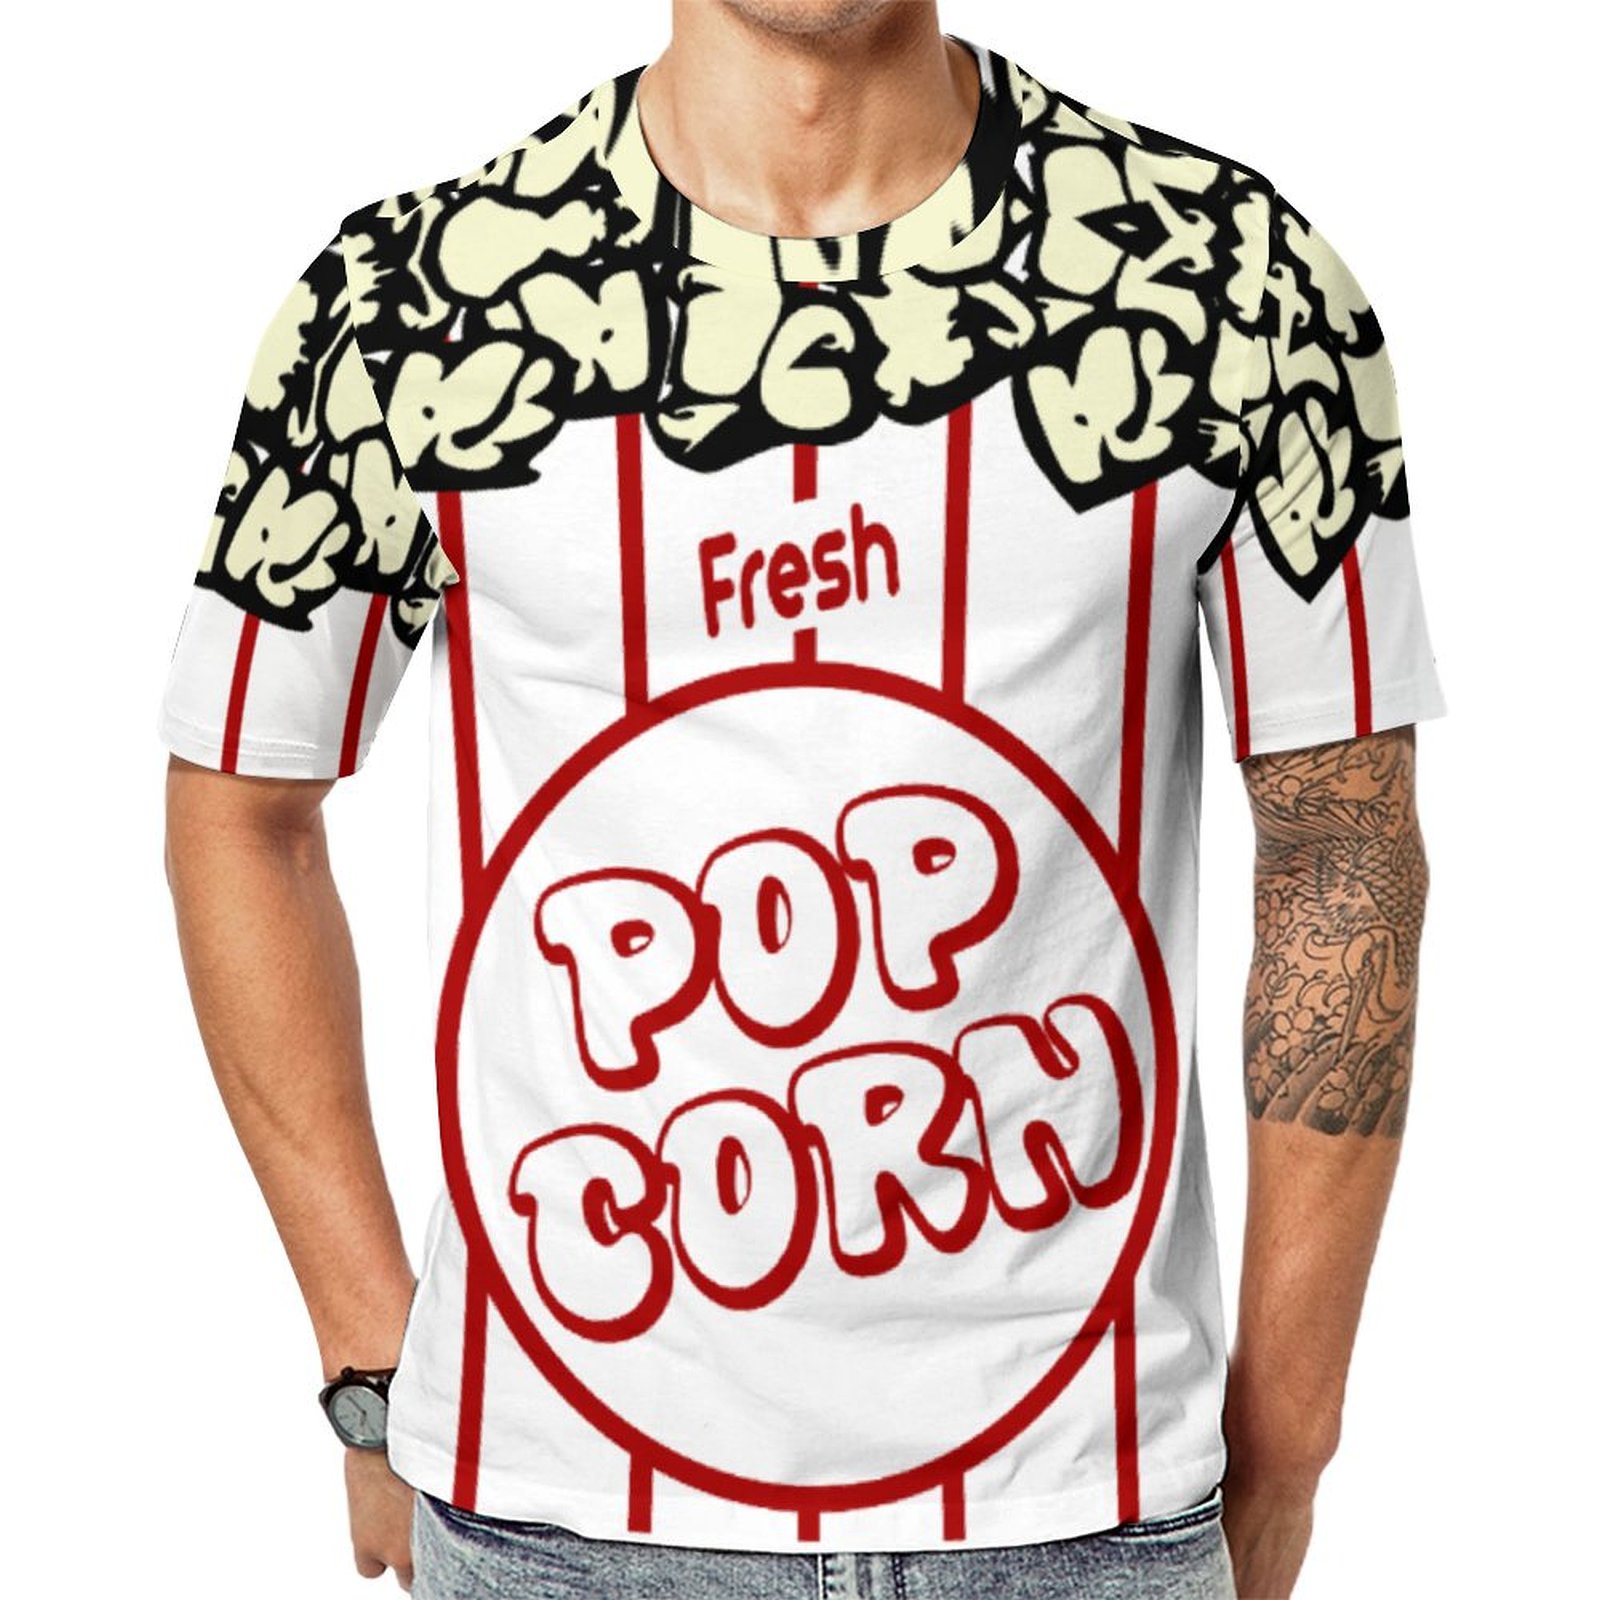 Fresh Popcorn Home Movie Theater Short Sleeve Print Unisex Tshirt Summer Casual Tees for Men and Women Coolcoshirts